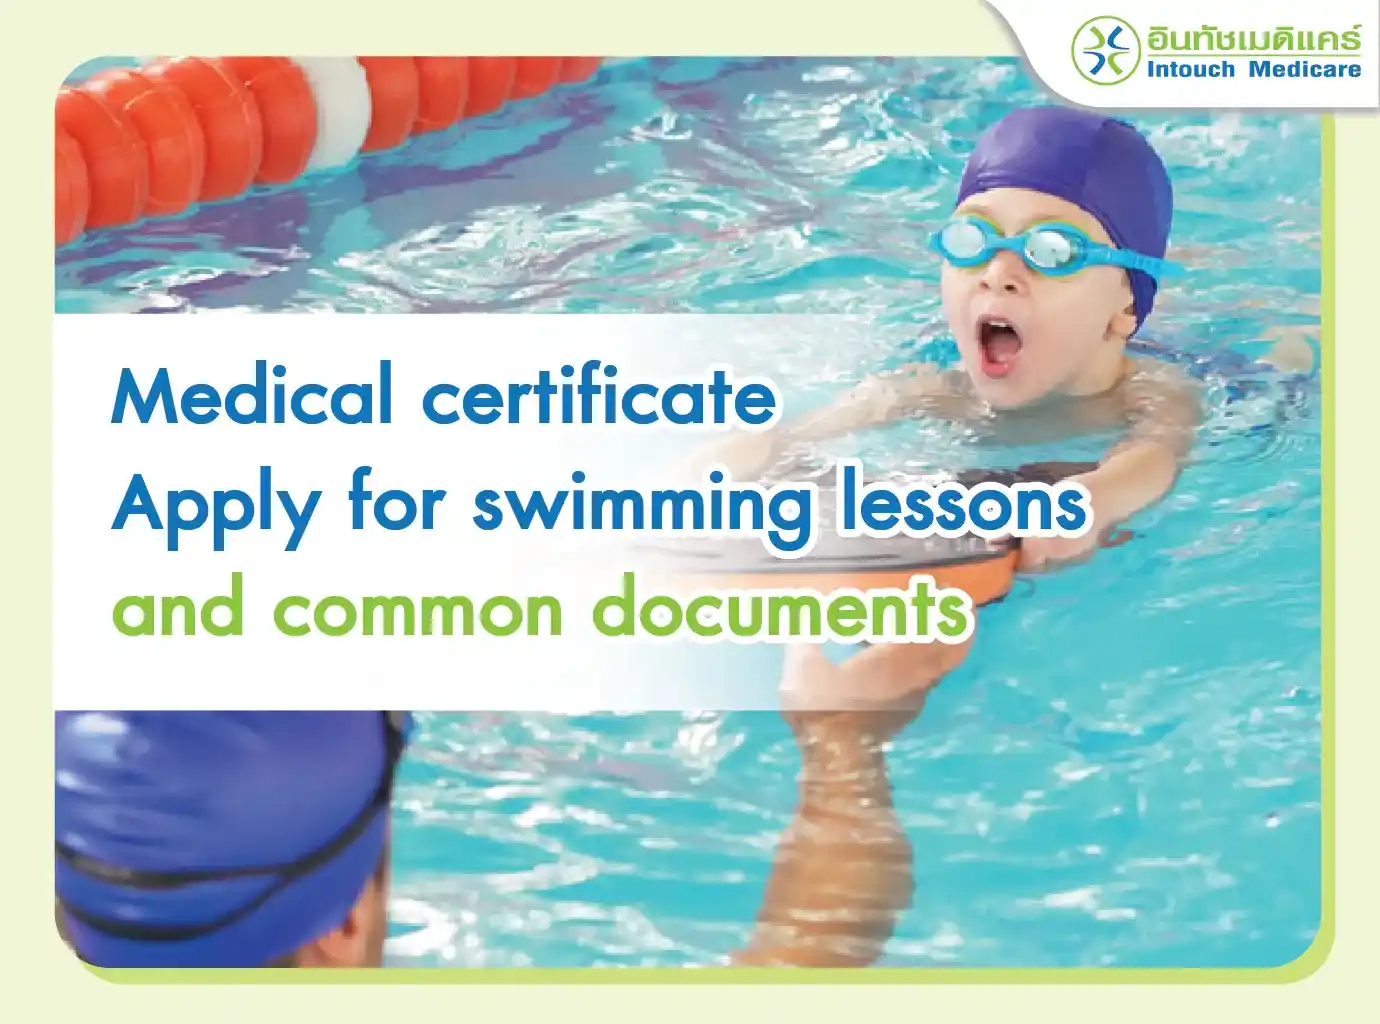 What is a medical certificate for swimming lessons?